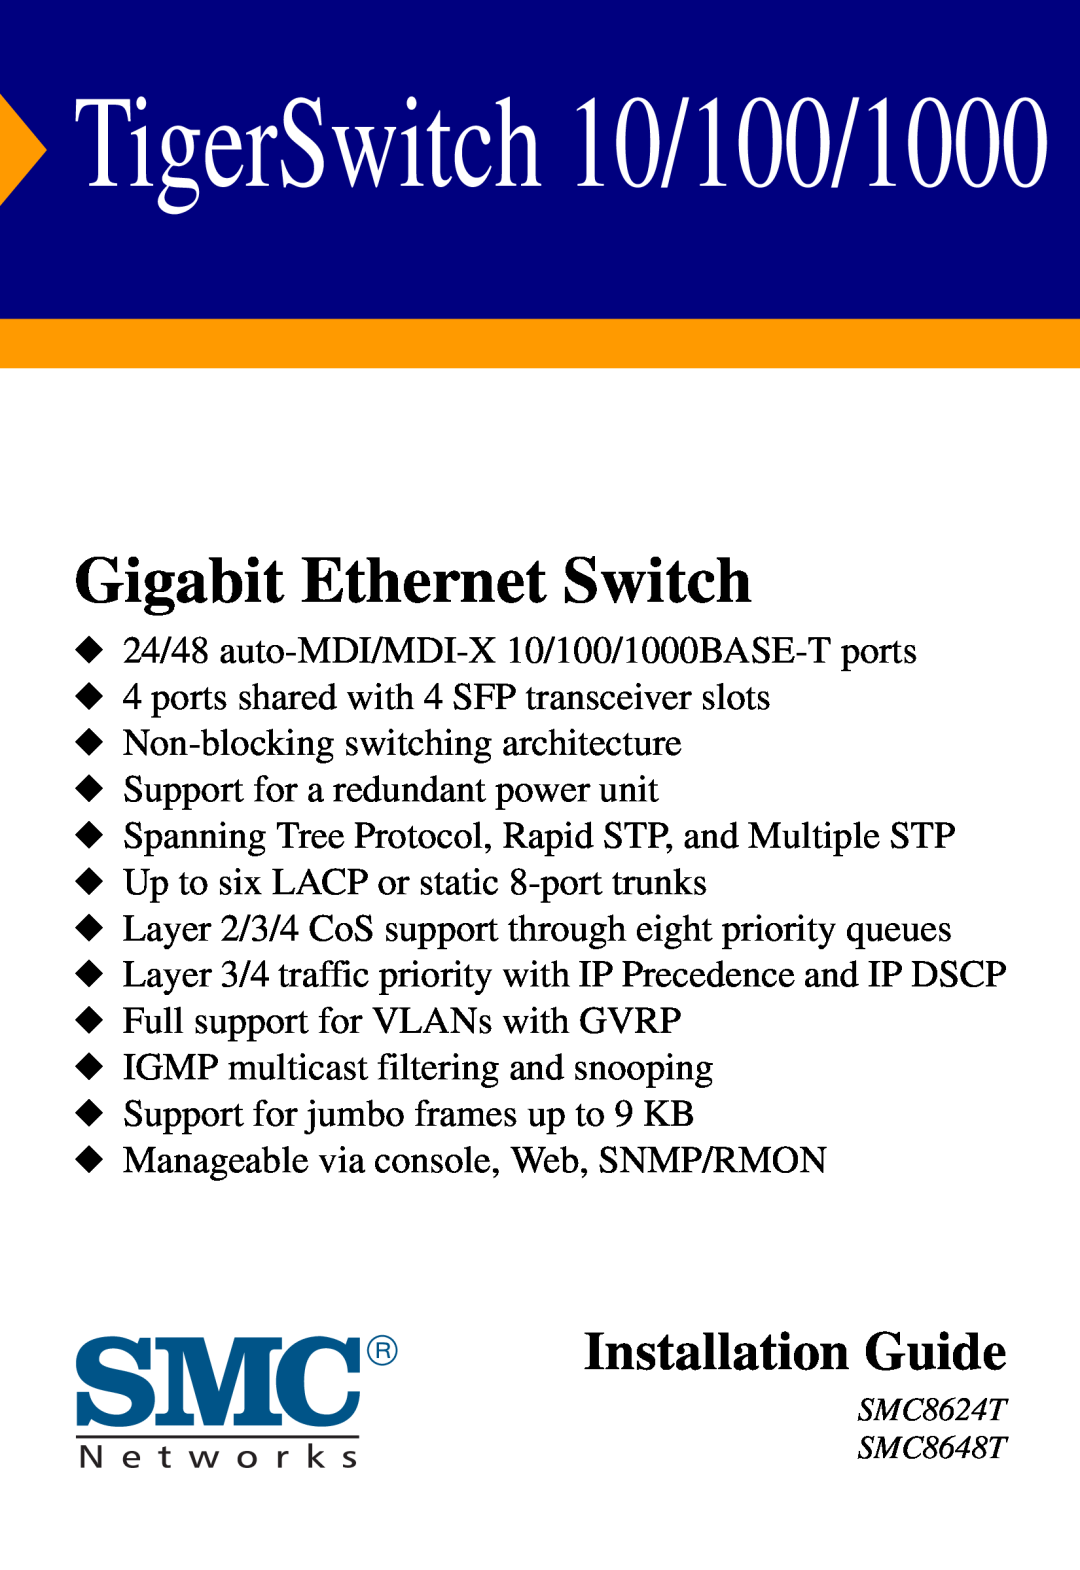 SMC Networks SMC8624T manual Gigabit Ethernet Switch, TigerSwitch 10/100/1000, Installation Guide 